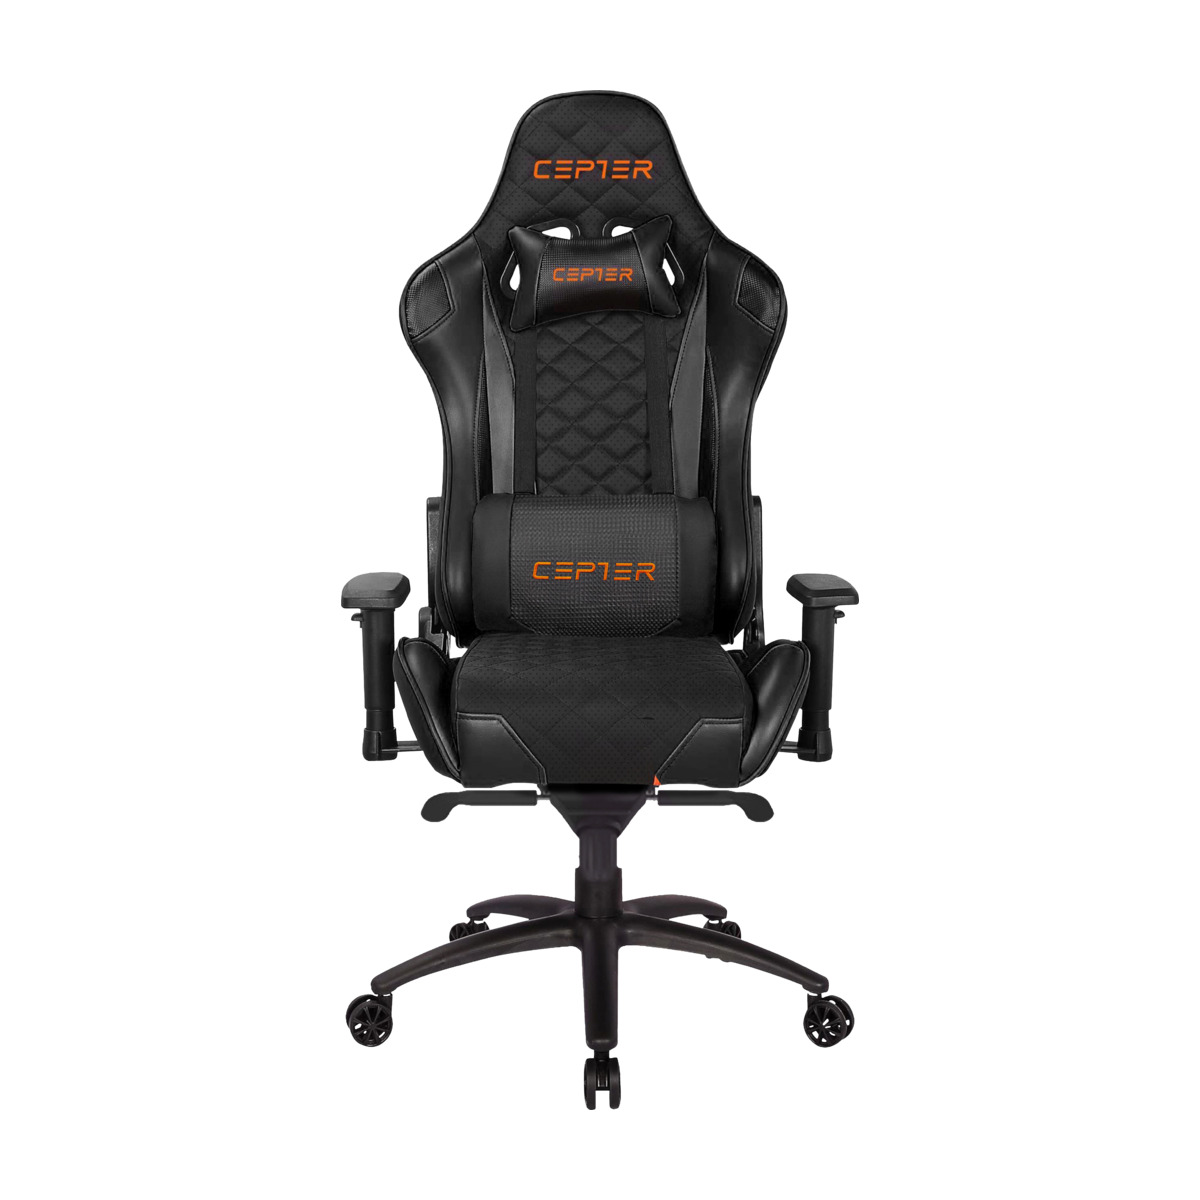 CEPTER ROGUE GAMING CHAIR BLACK Power.fi